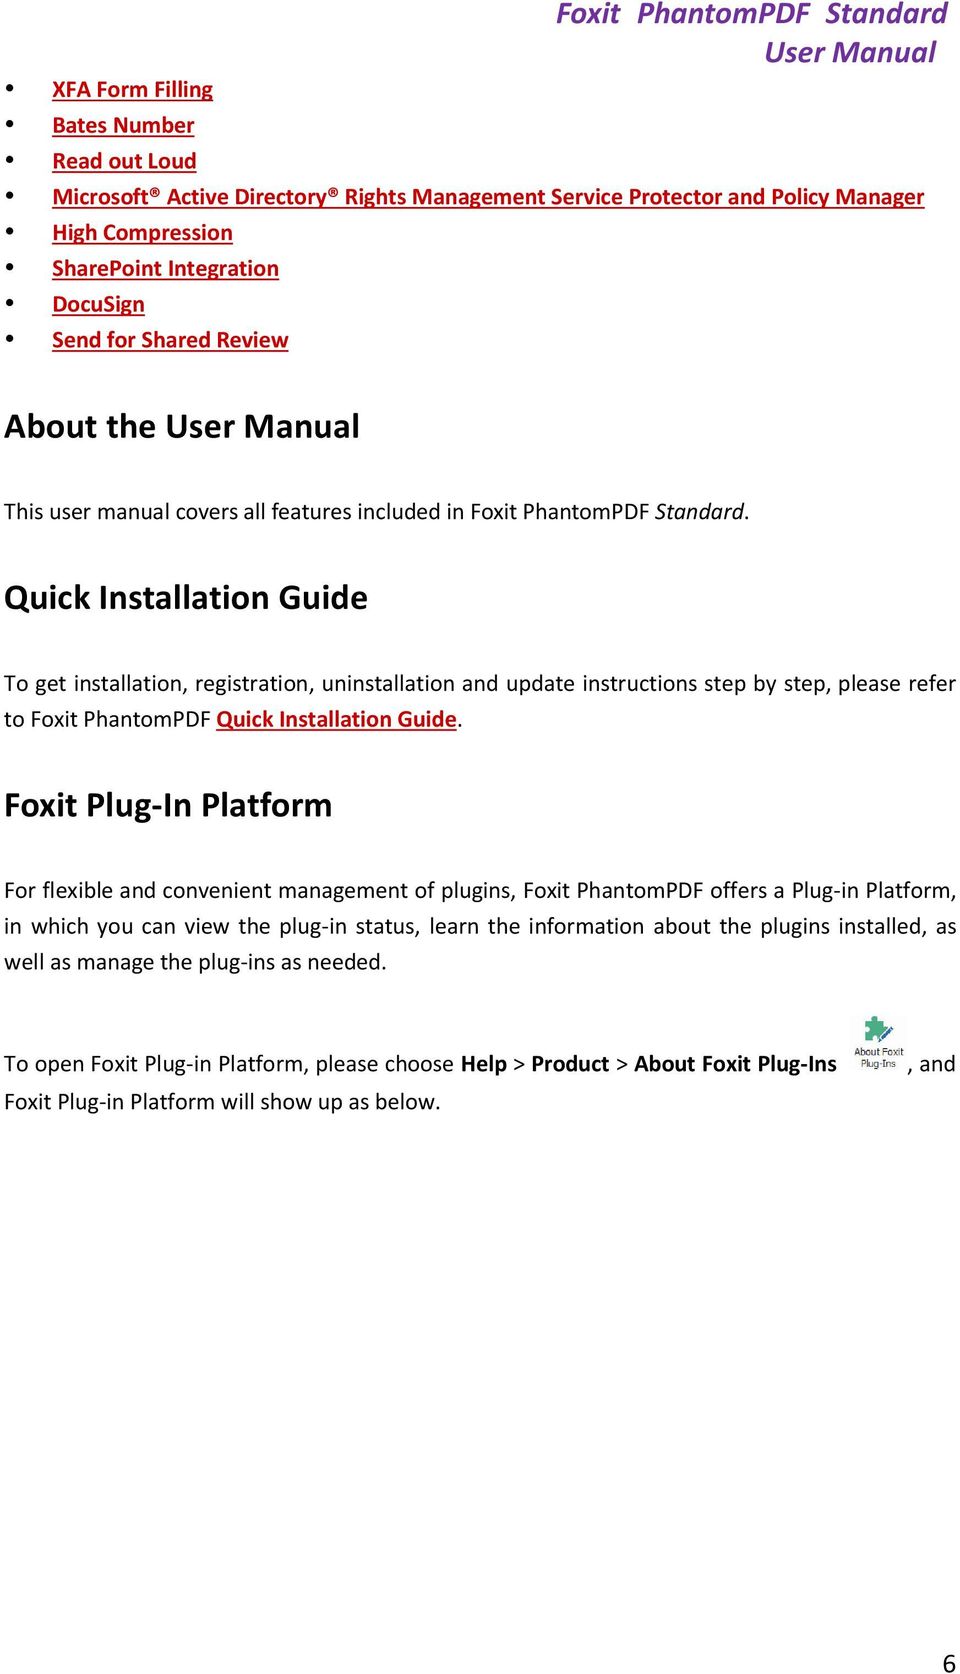 Quick Installation Guide To get installation, registration, uninstallation and update instructions step by step, please refer to Foxit PhantomPDF Quick Installation Guide.